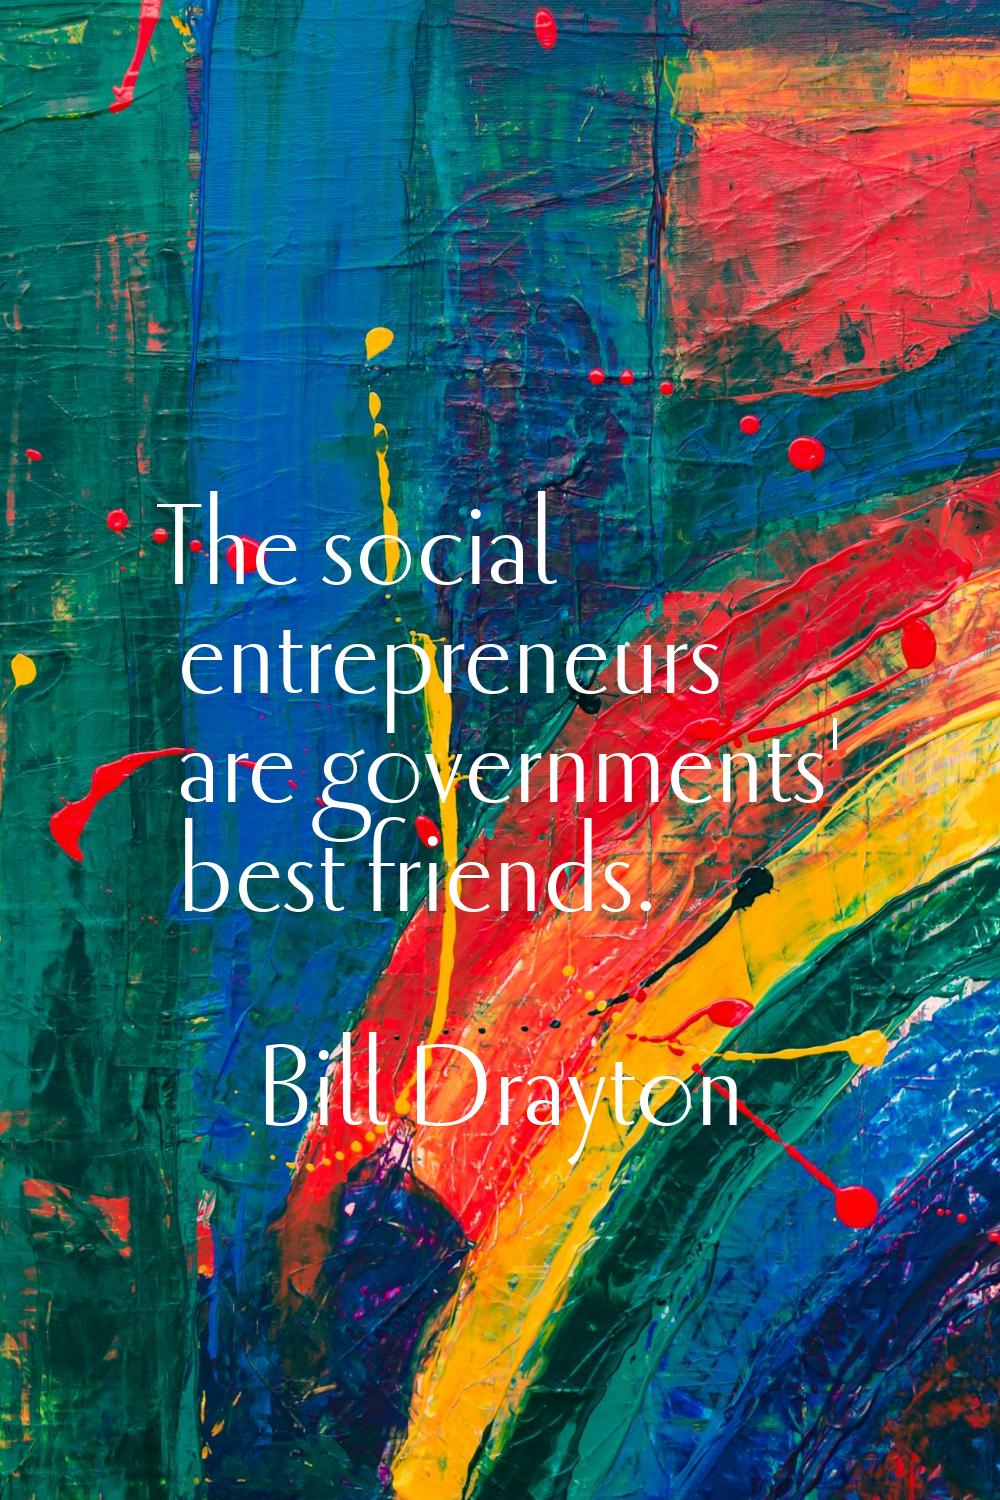 The social entrepreneurs are governments' best friends.